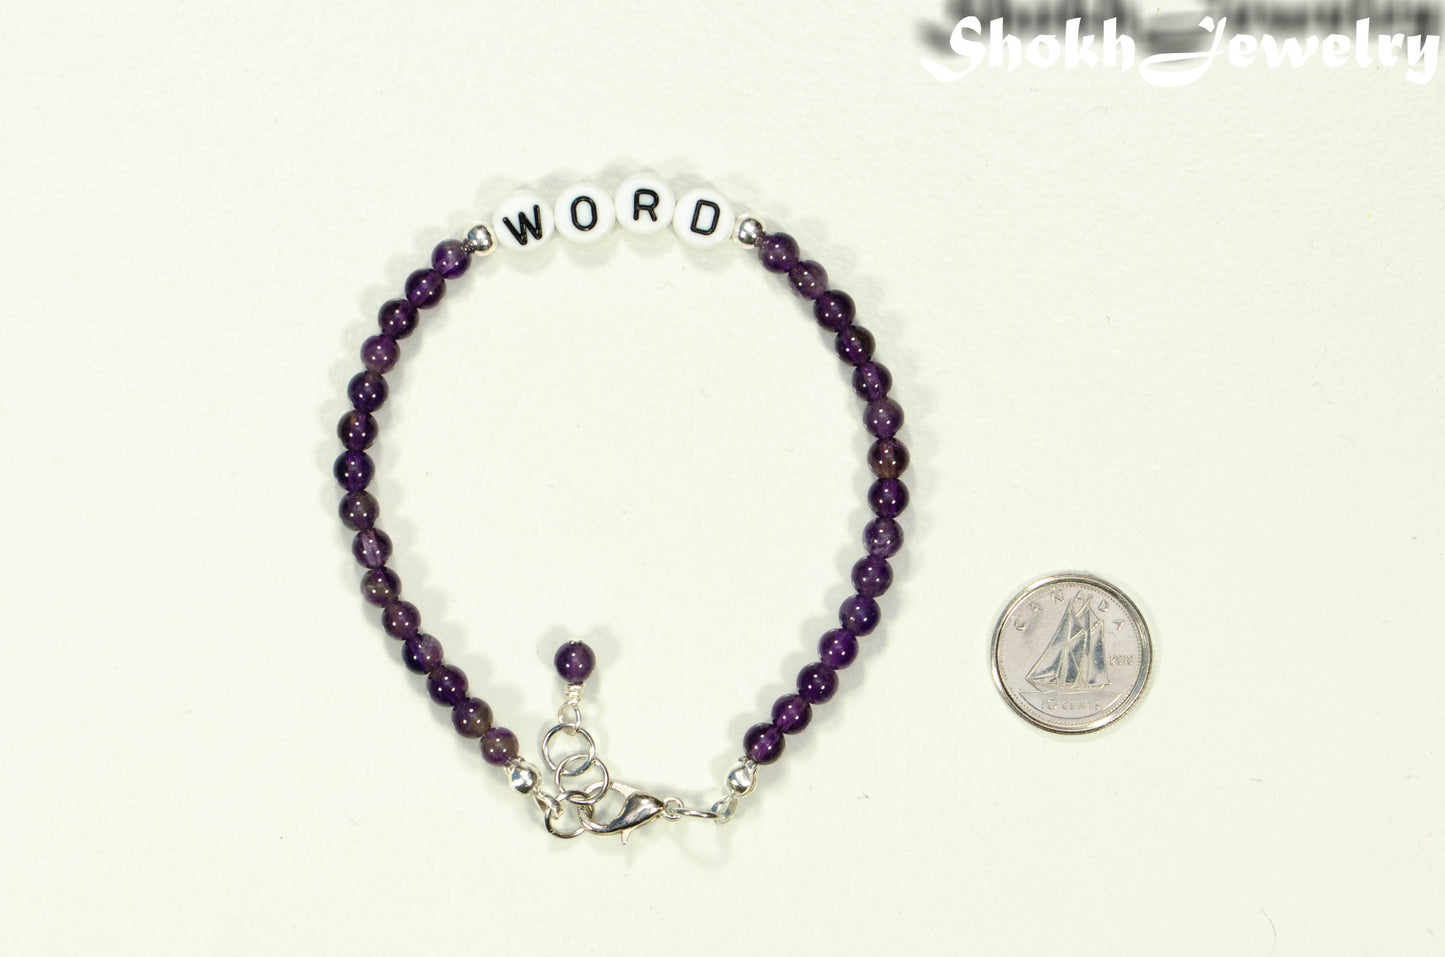 Personalized Amethyst Bracelet with Clasp beside a dime.